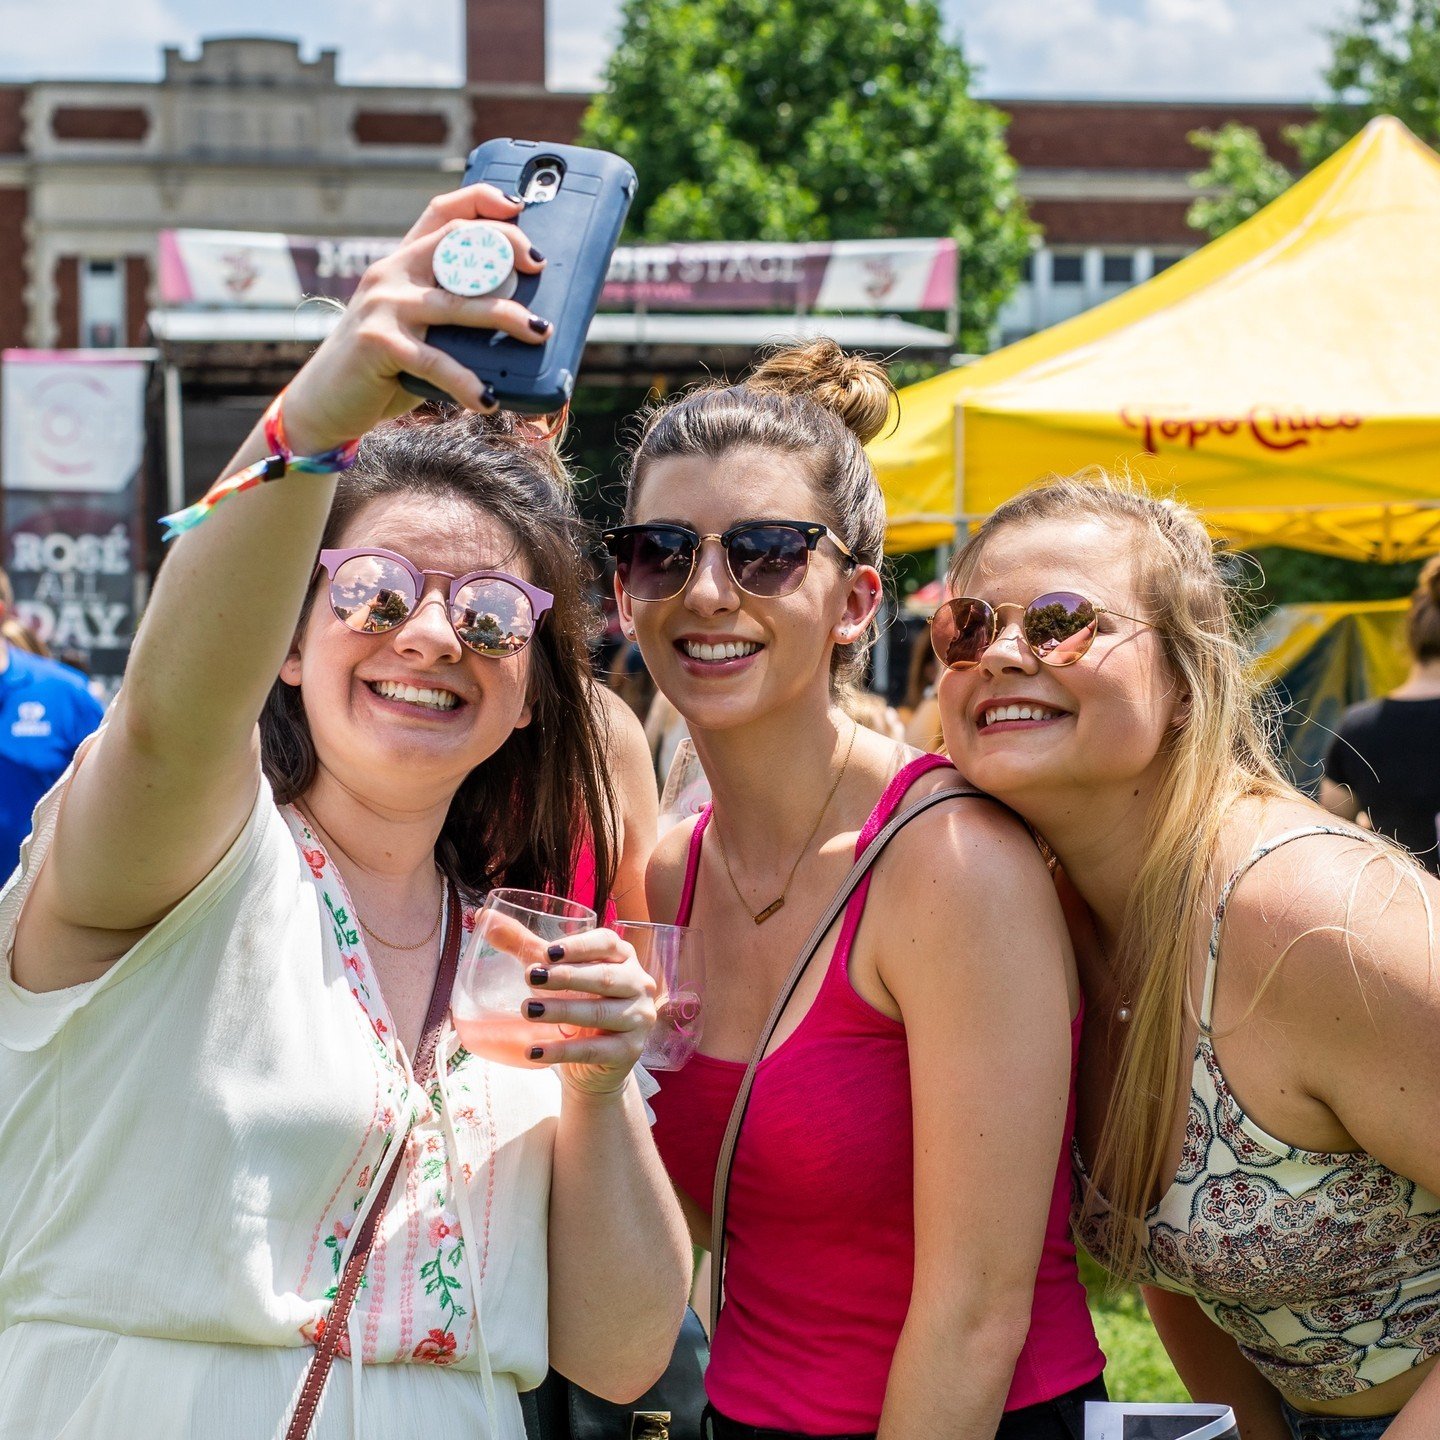 Saturday, May 18 is a day for ... GIRLS WHO JUST WANNA HAVE FUH-UN! 
🥂 🍷 💗
Nashville Ros&eacute; Festival at East Park is just the event for bachelorette parties, girl roundups and more! Get your girl posse together and get those tickets 
🎟 👇
Ti